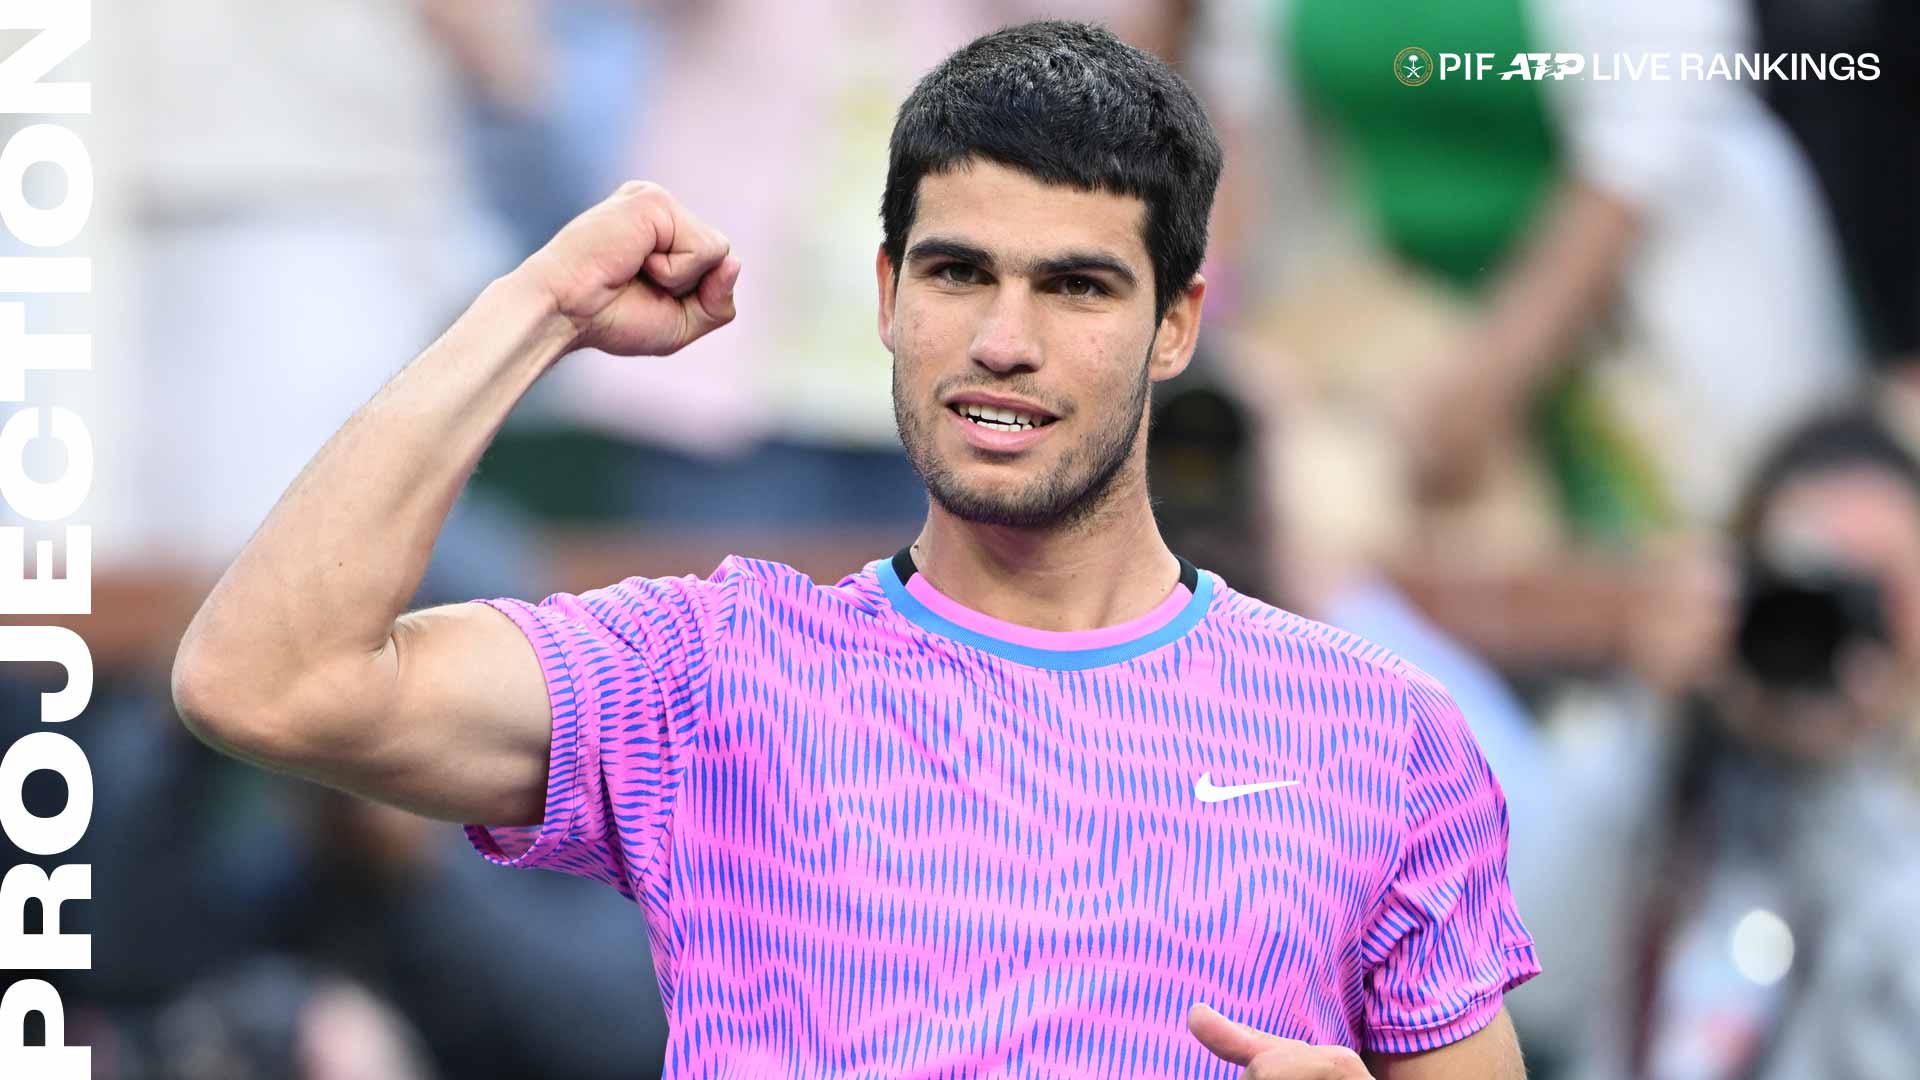 Carlos Alcaraz is No. 2 in the PIF ATP Live Rankings after Indian Wells.